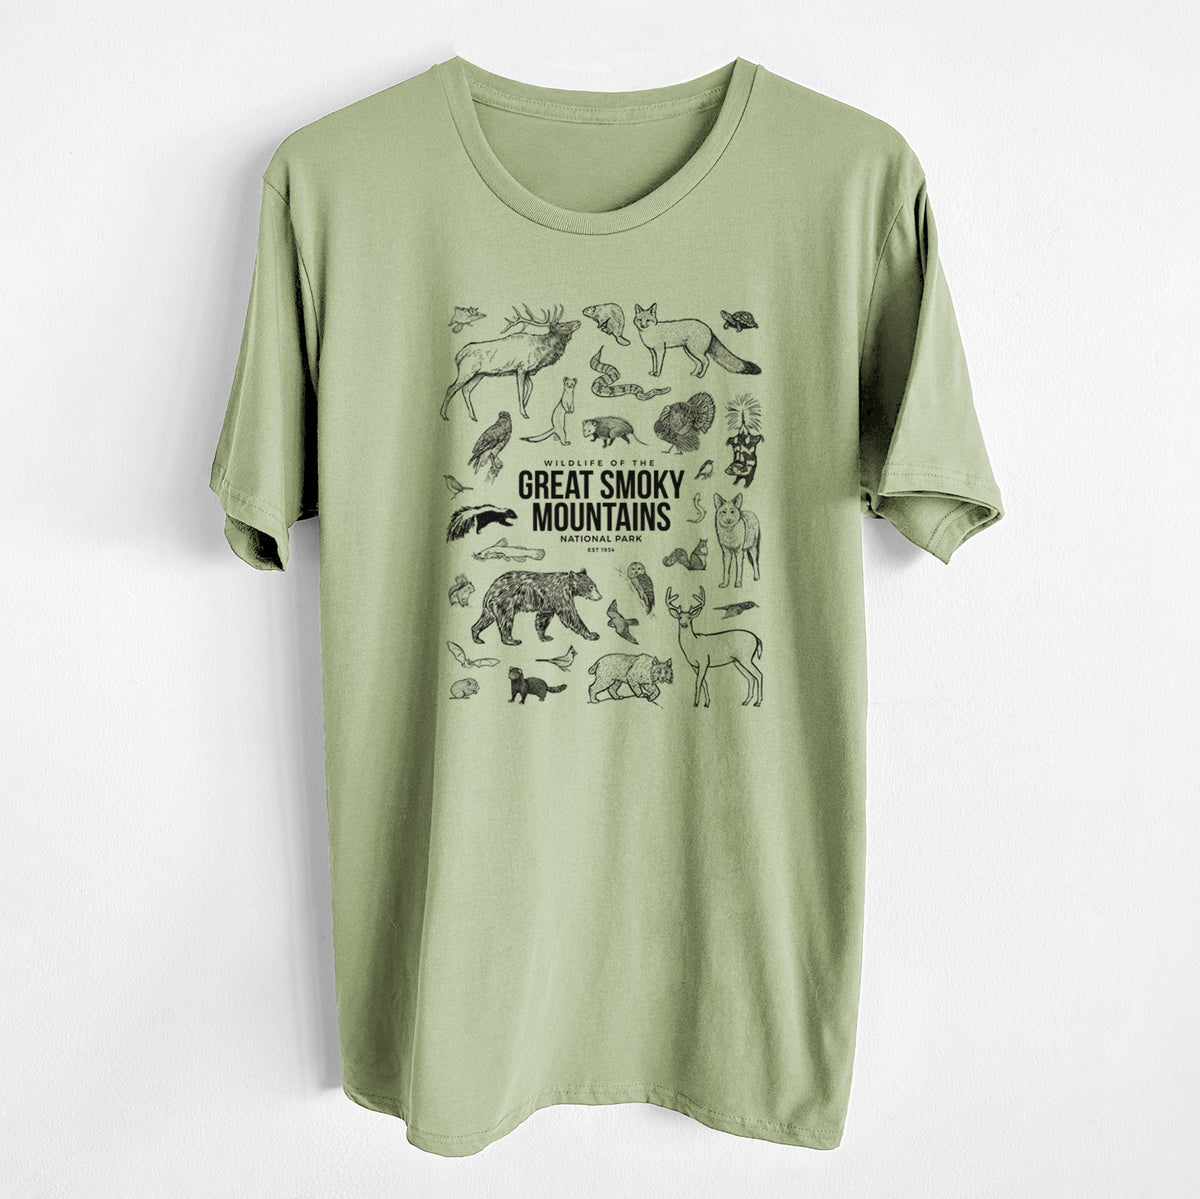 Wildlife of the Great Smoky Mountains National Park - Unisex Crewneck - Made in USA - 100% Organic Cotton